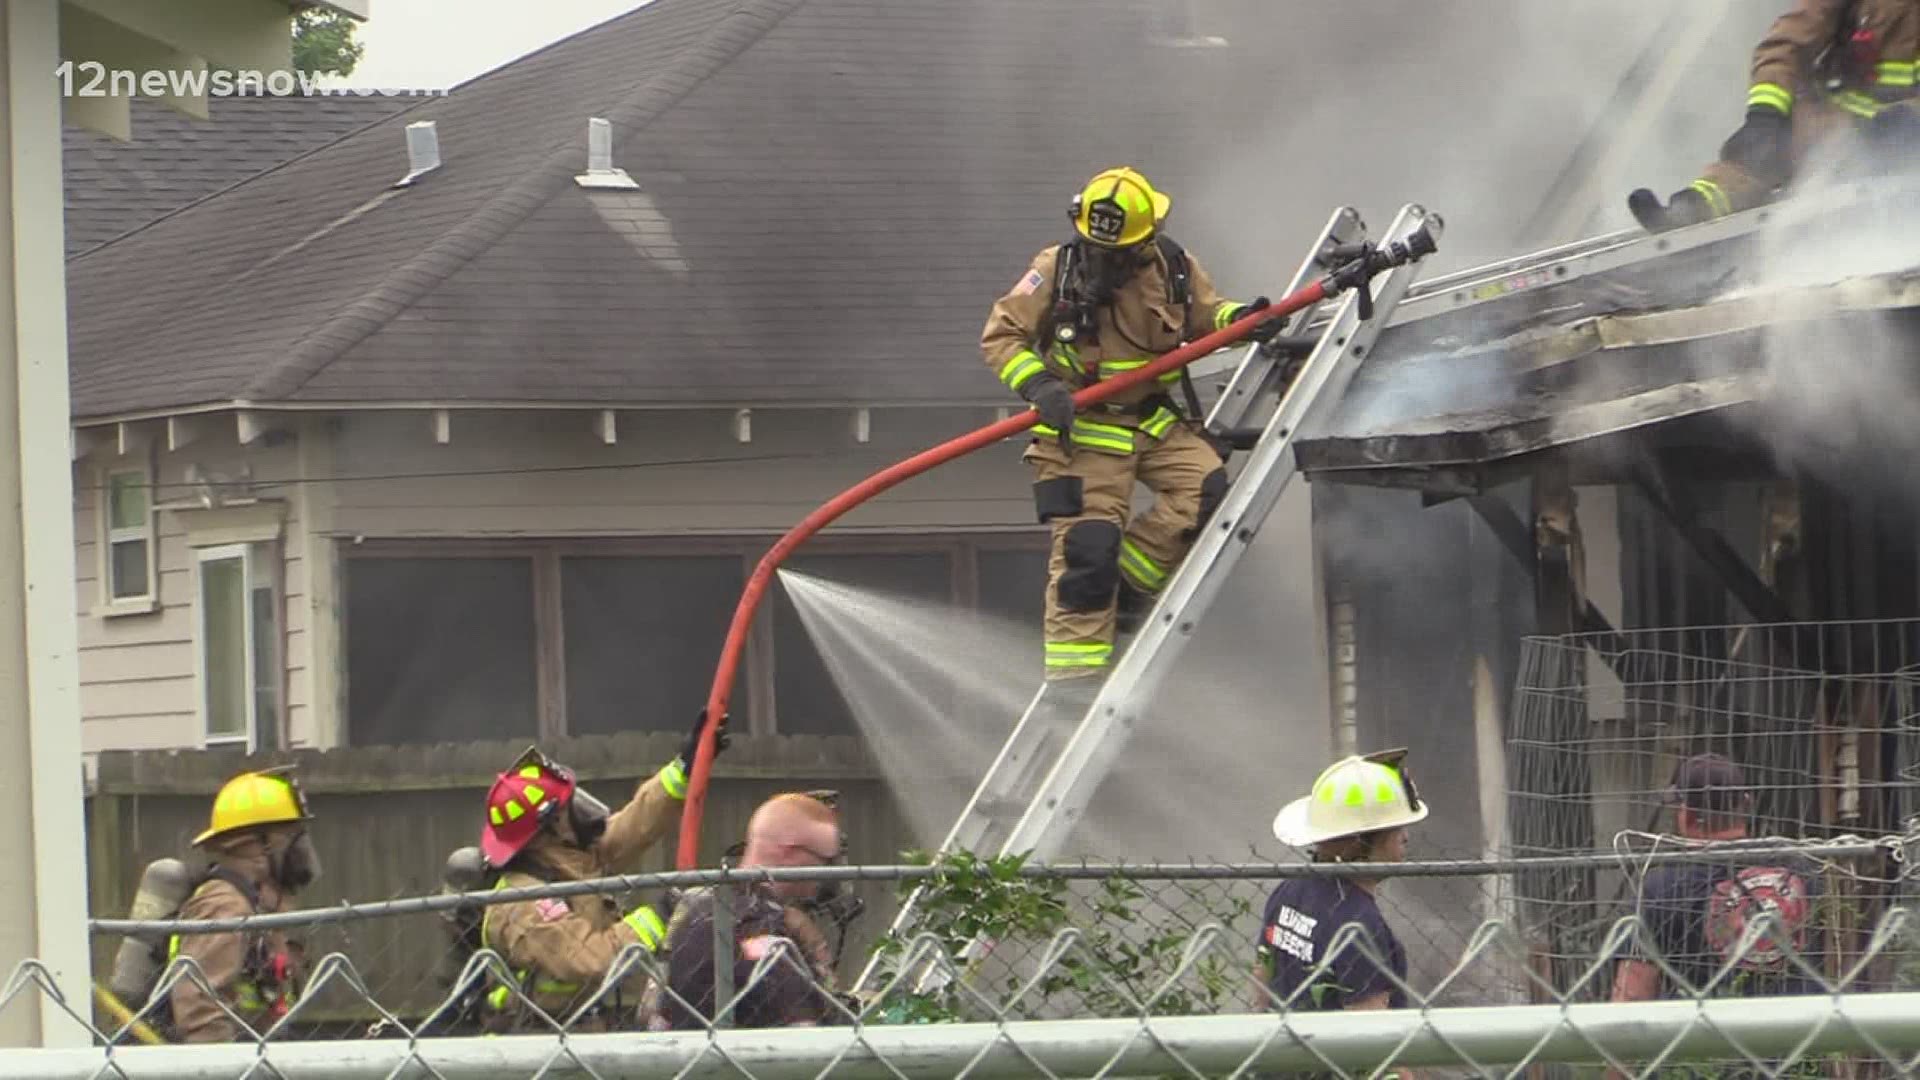 Firefighters believe the fire was an accident.